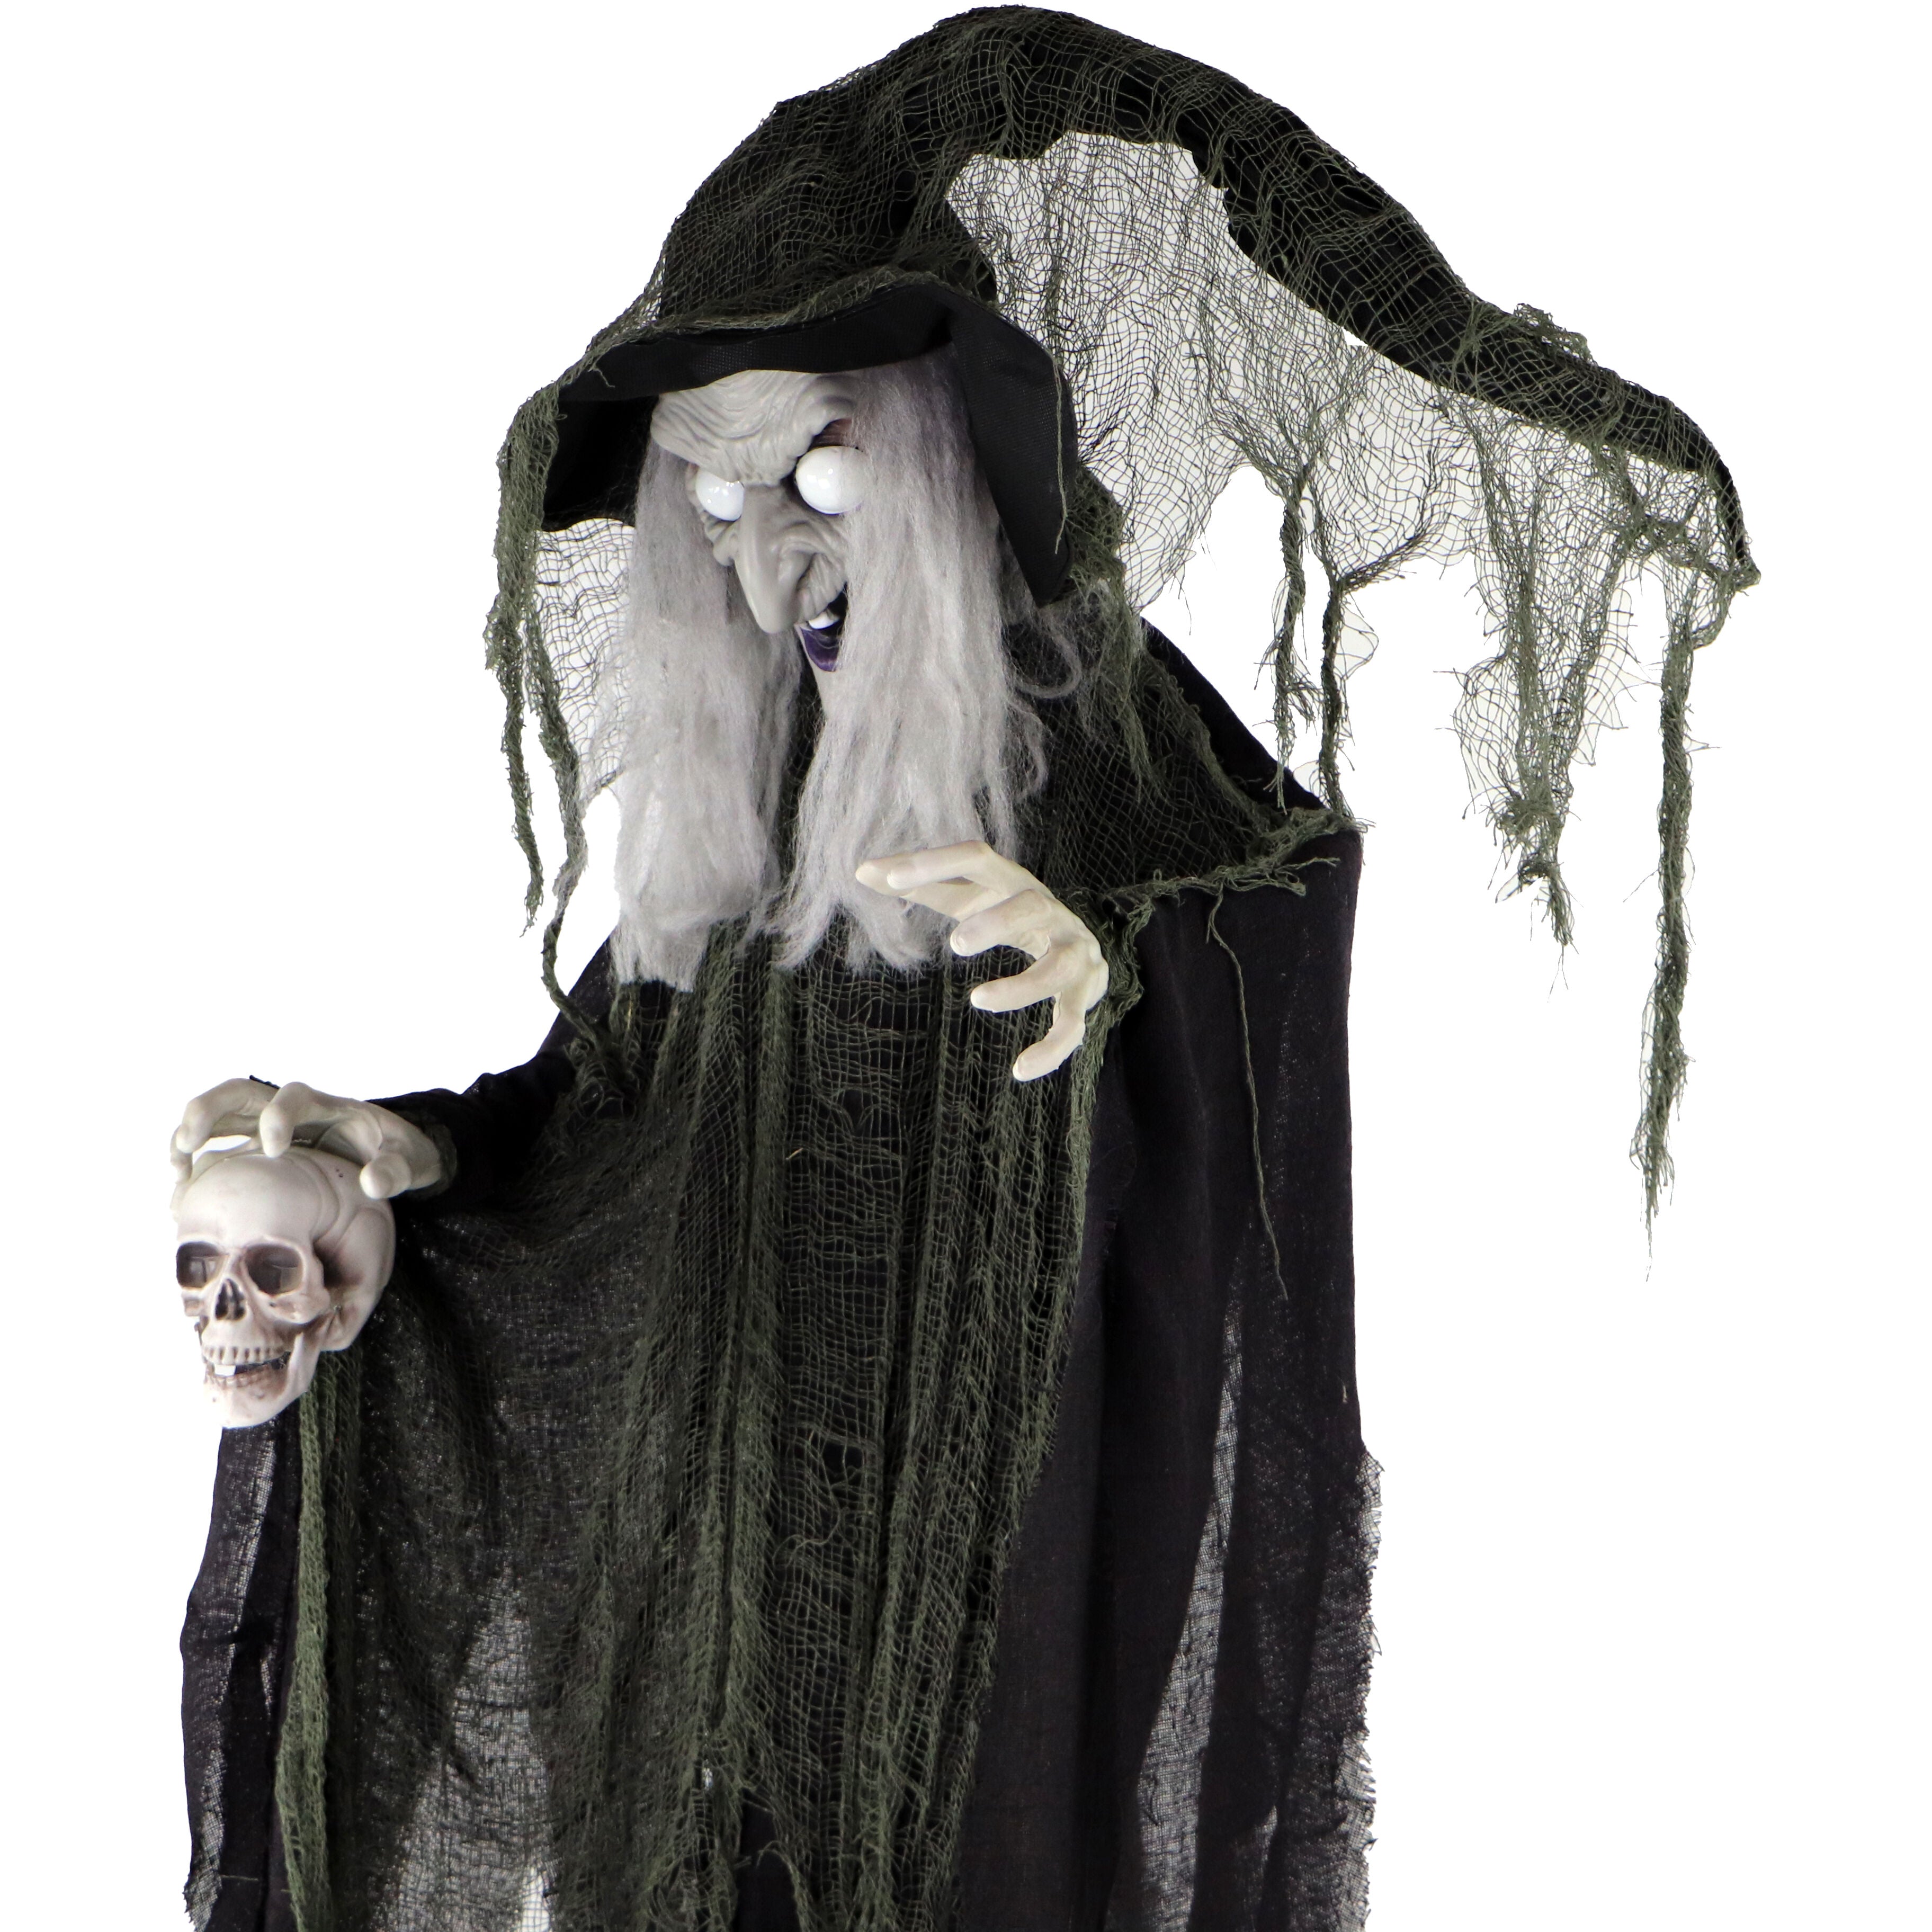 Haunted Hill Farm -  Edith the Talking Animatronic Witch with Shrunken Skull, Indoor or Covered Outdoor Halloween Decoration